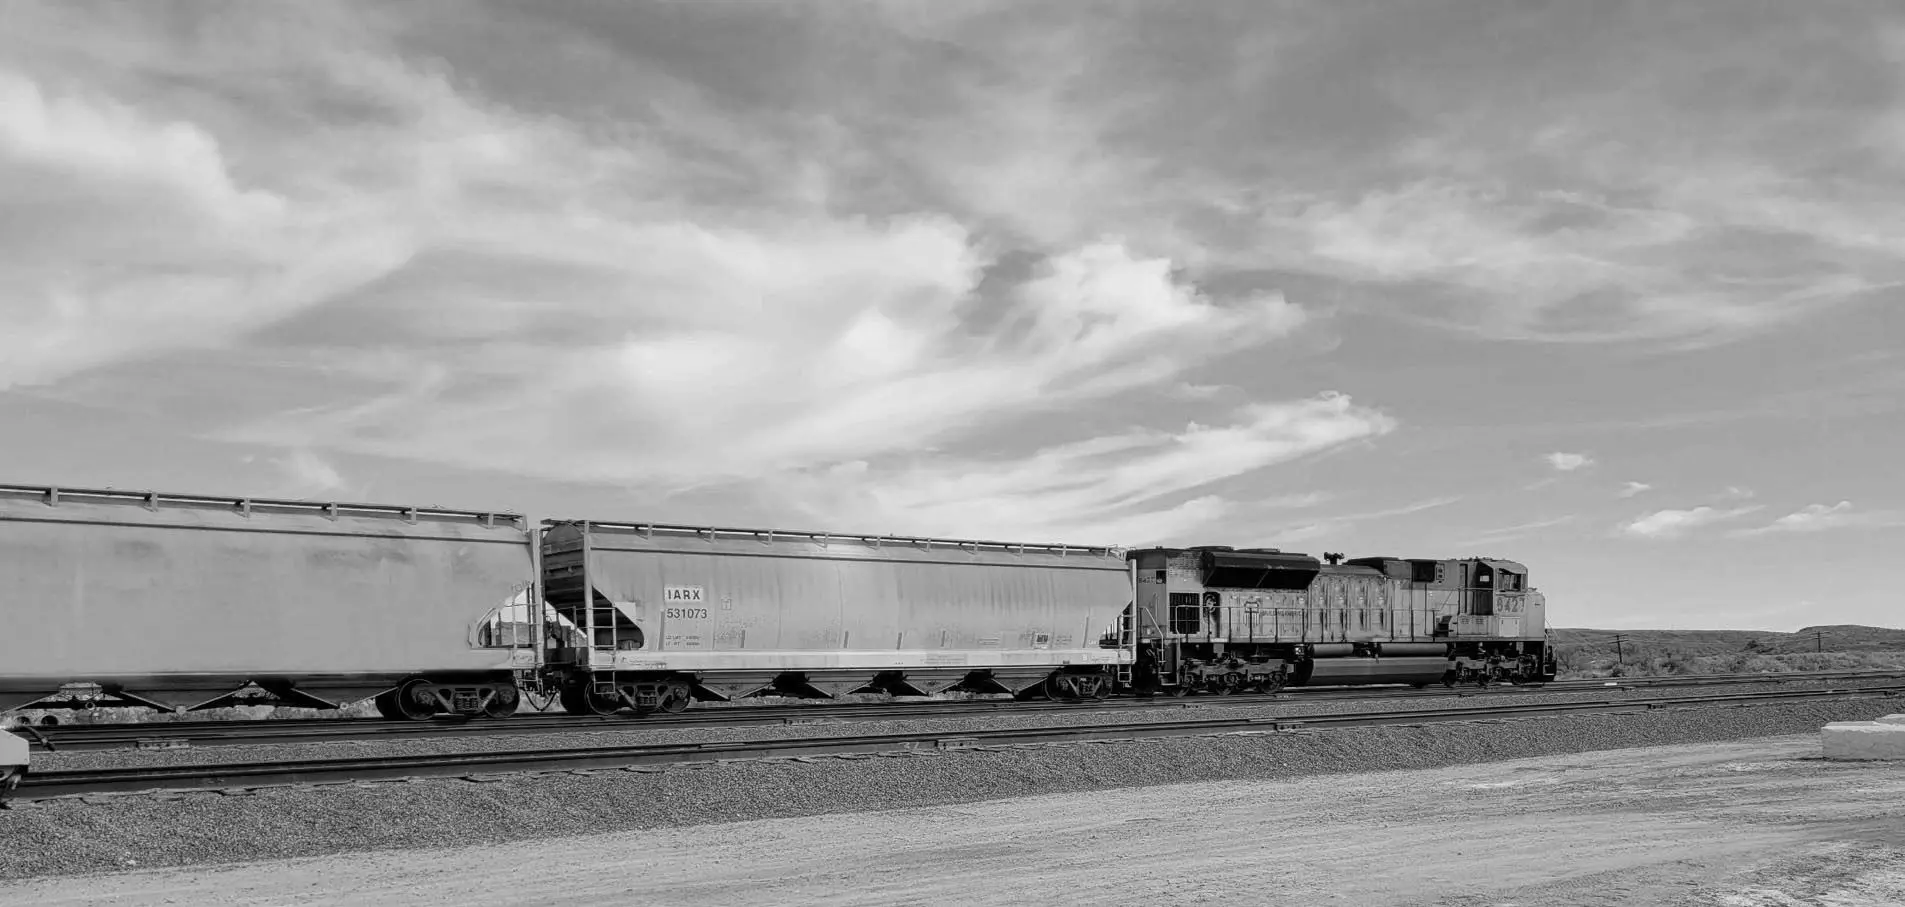 A train is traveling down the tracks in black and white.